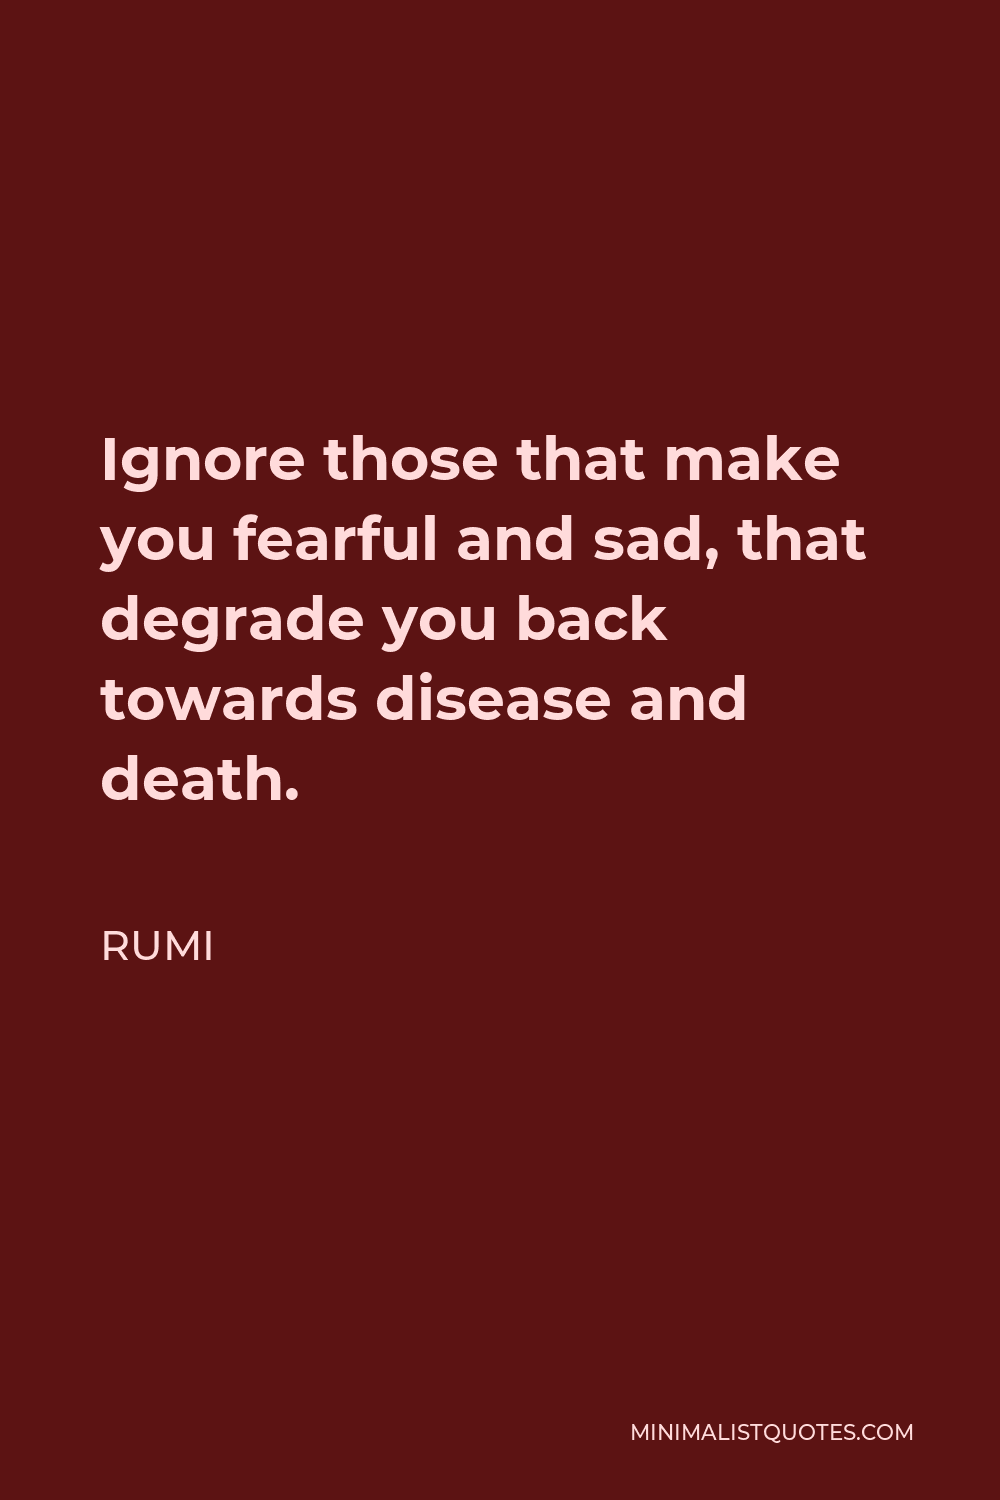 Rumi Quote - Ignore those that make you fearful and sad, that degrade you back towards disease and death.